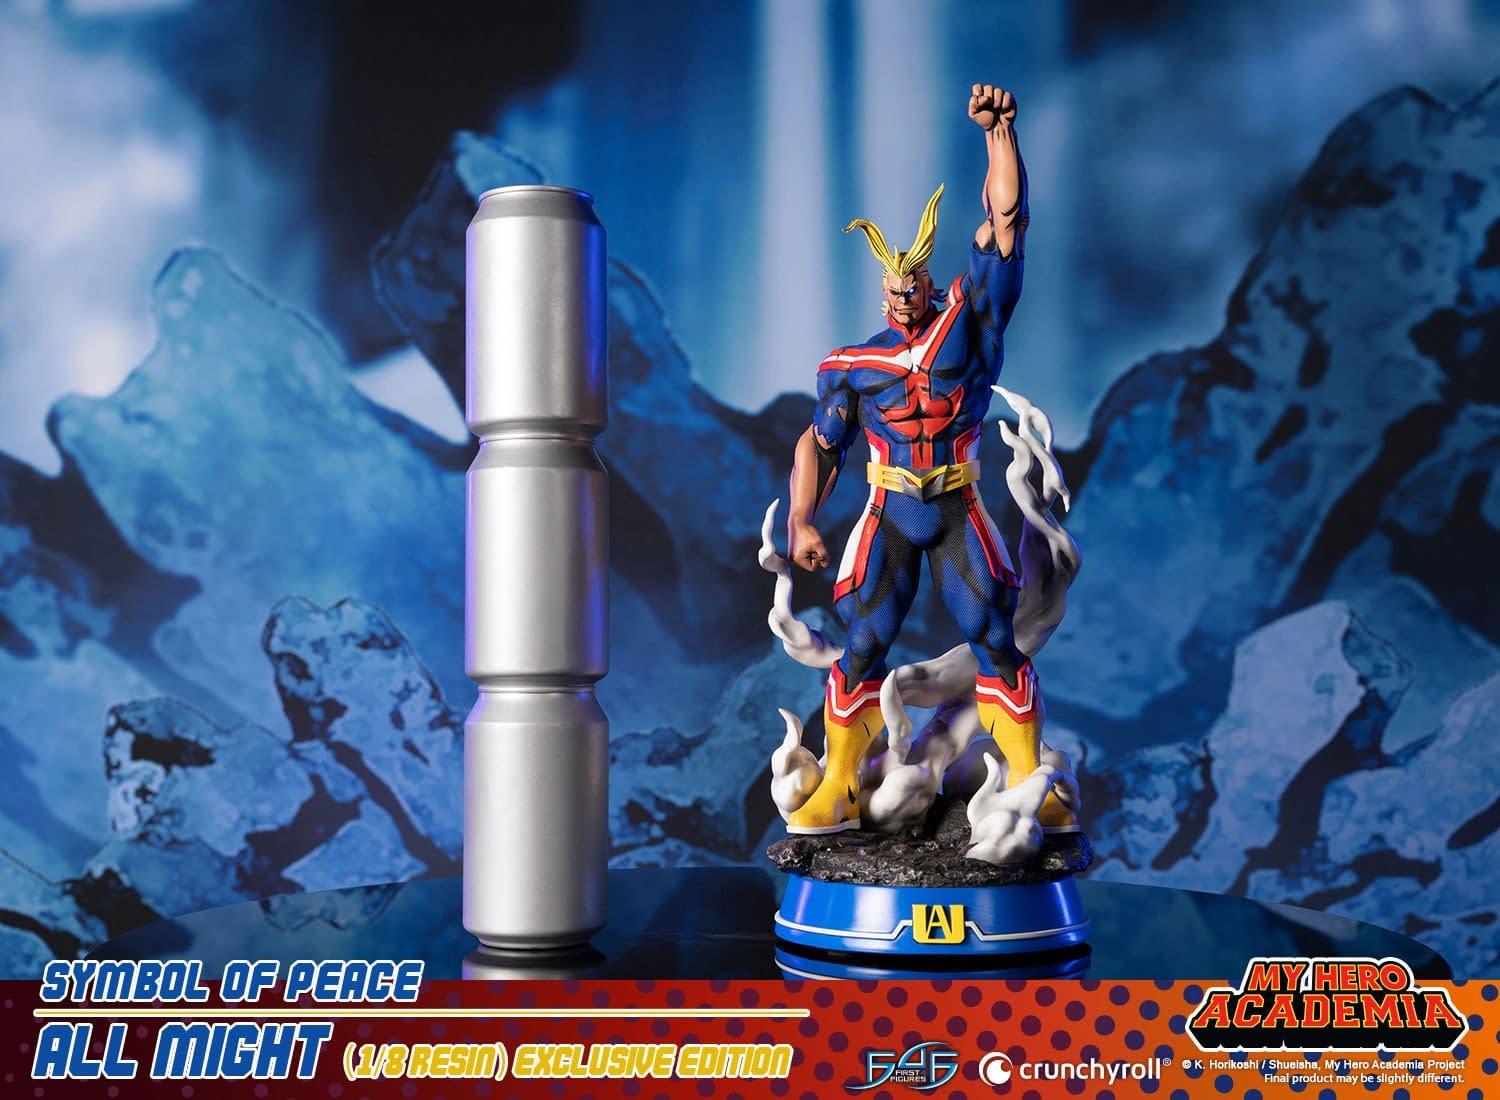 My Hero Academia's All Might is a Symbol of Peace with First 4 Figures